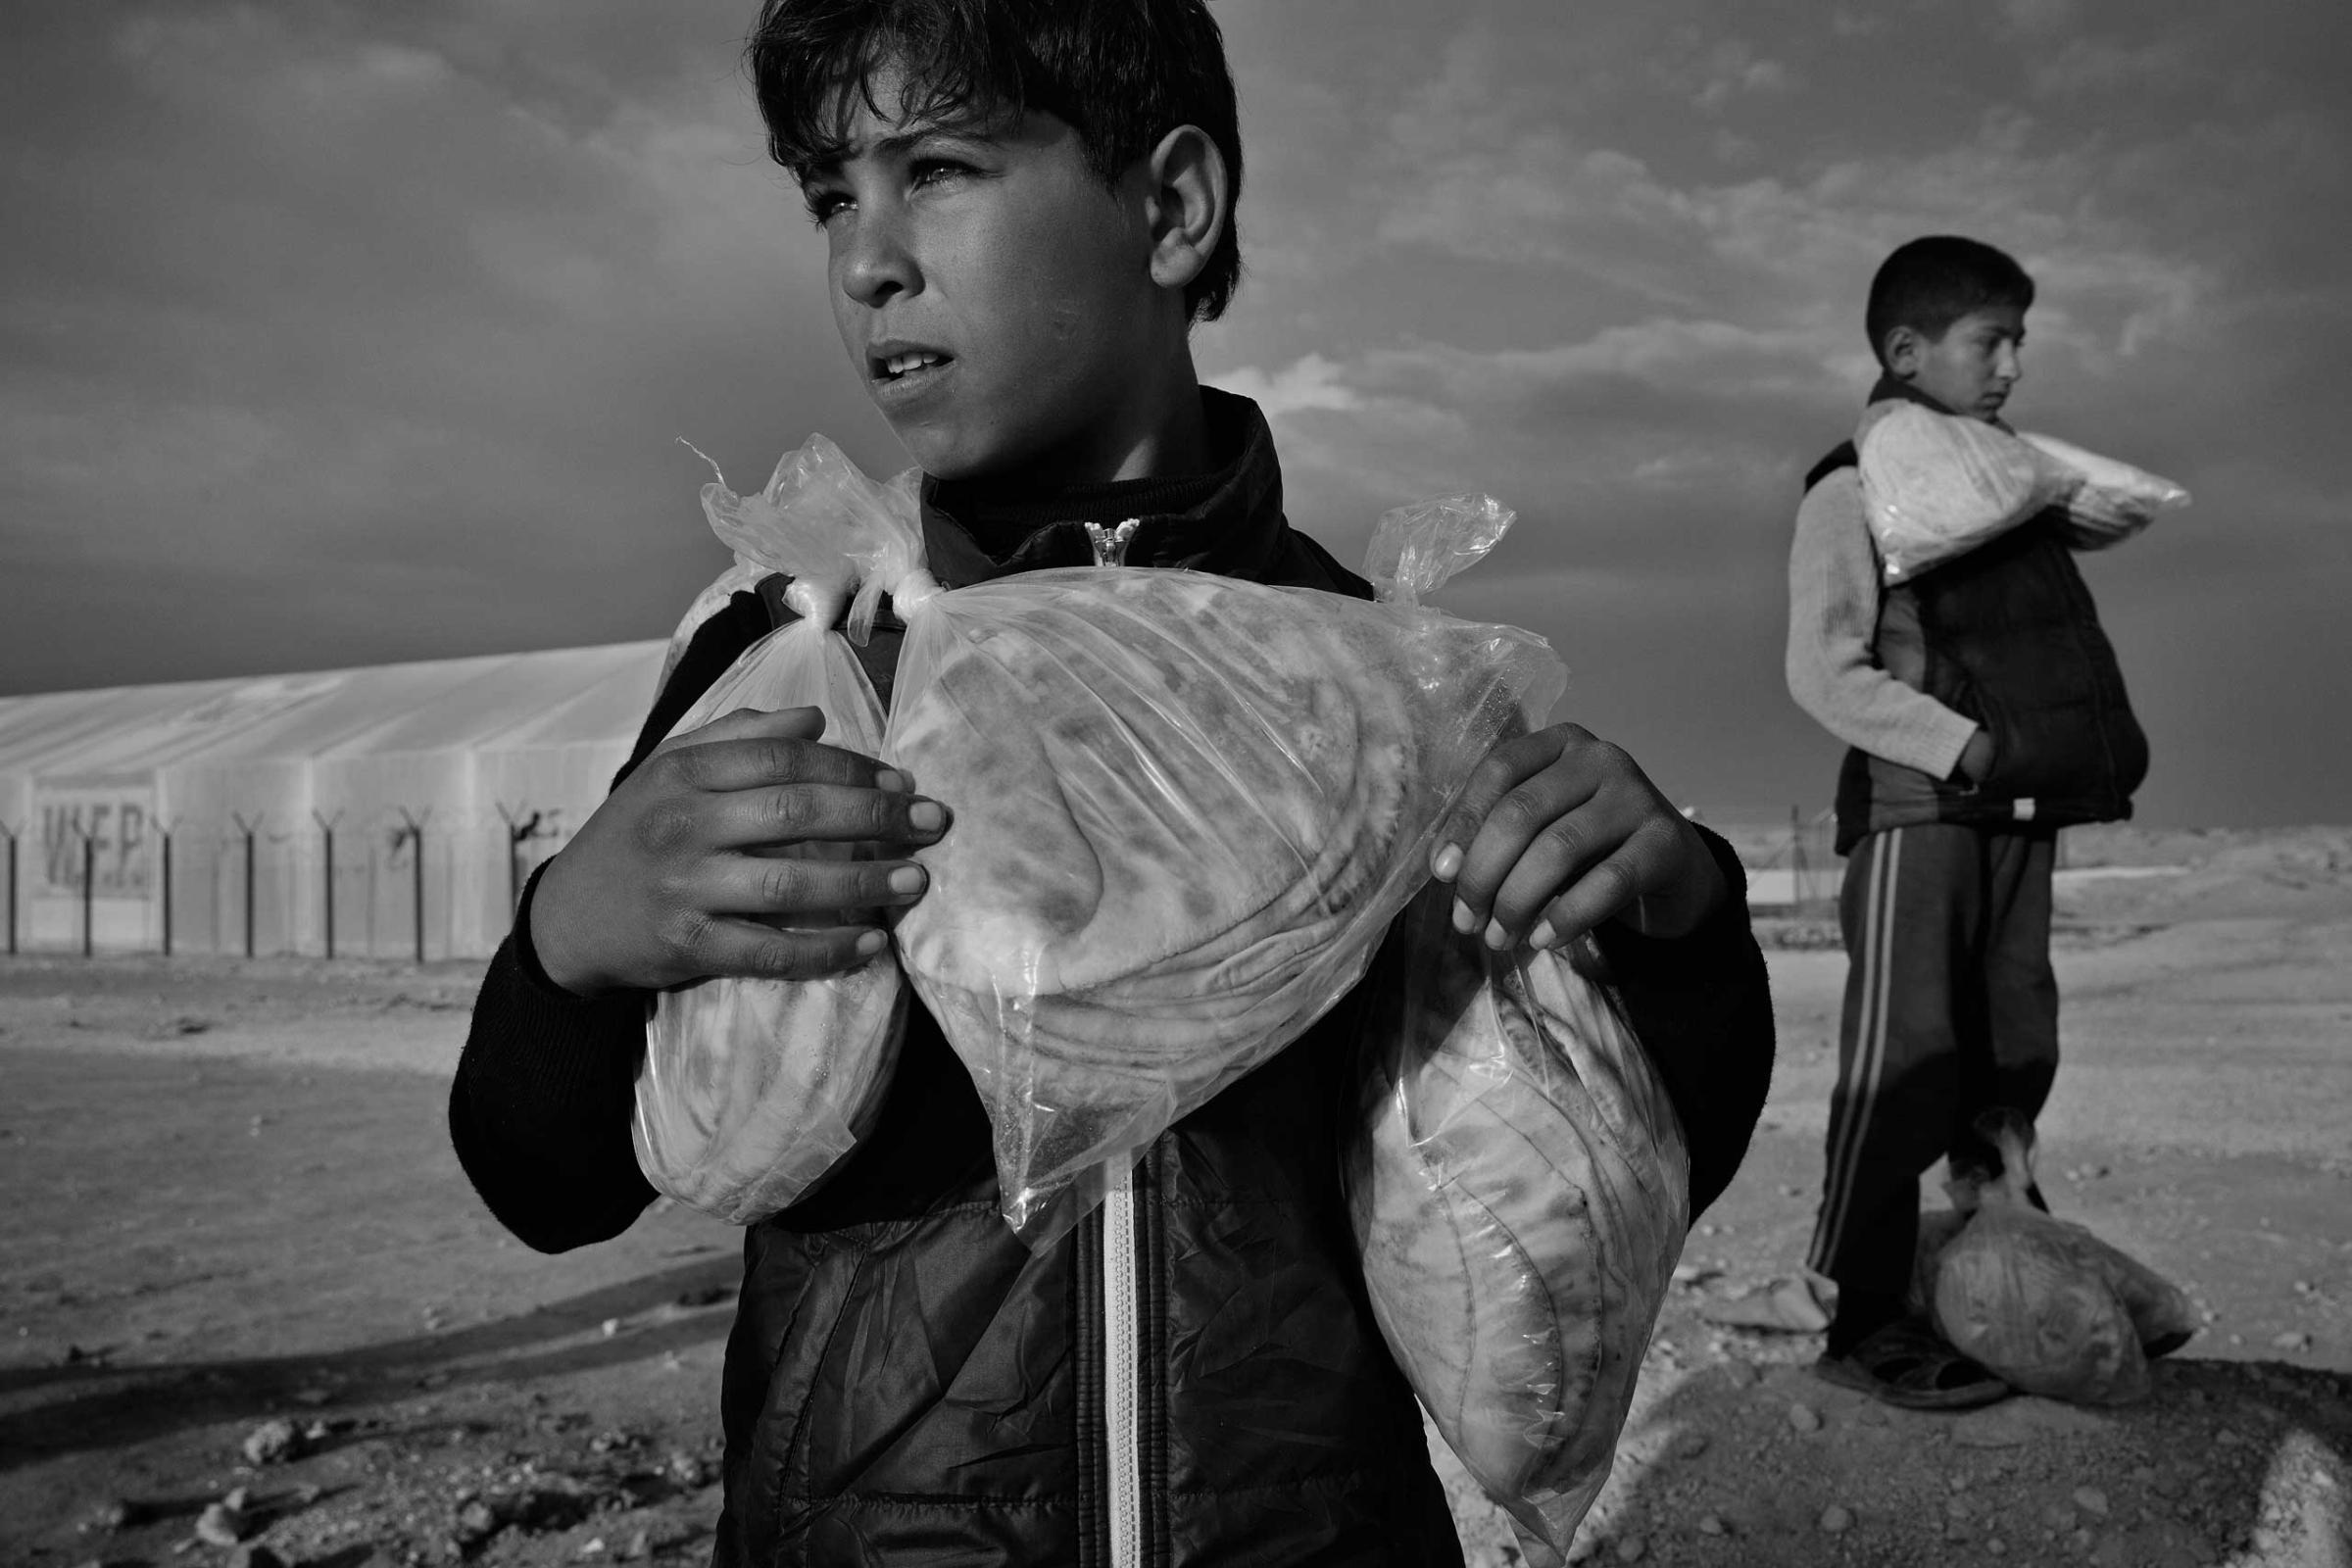 December 2013. Za'atari refugee camp, Jordan. Syrian boys carry their daily bread ration supplied by the World Food Programme.